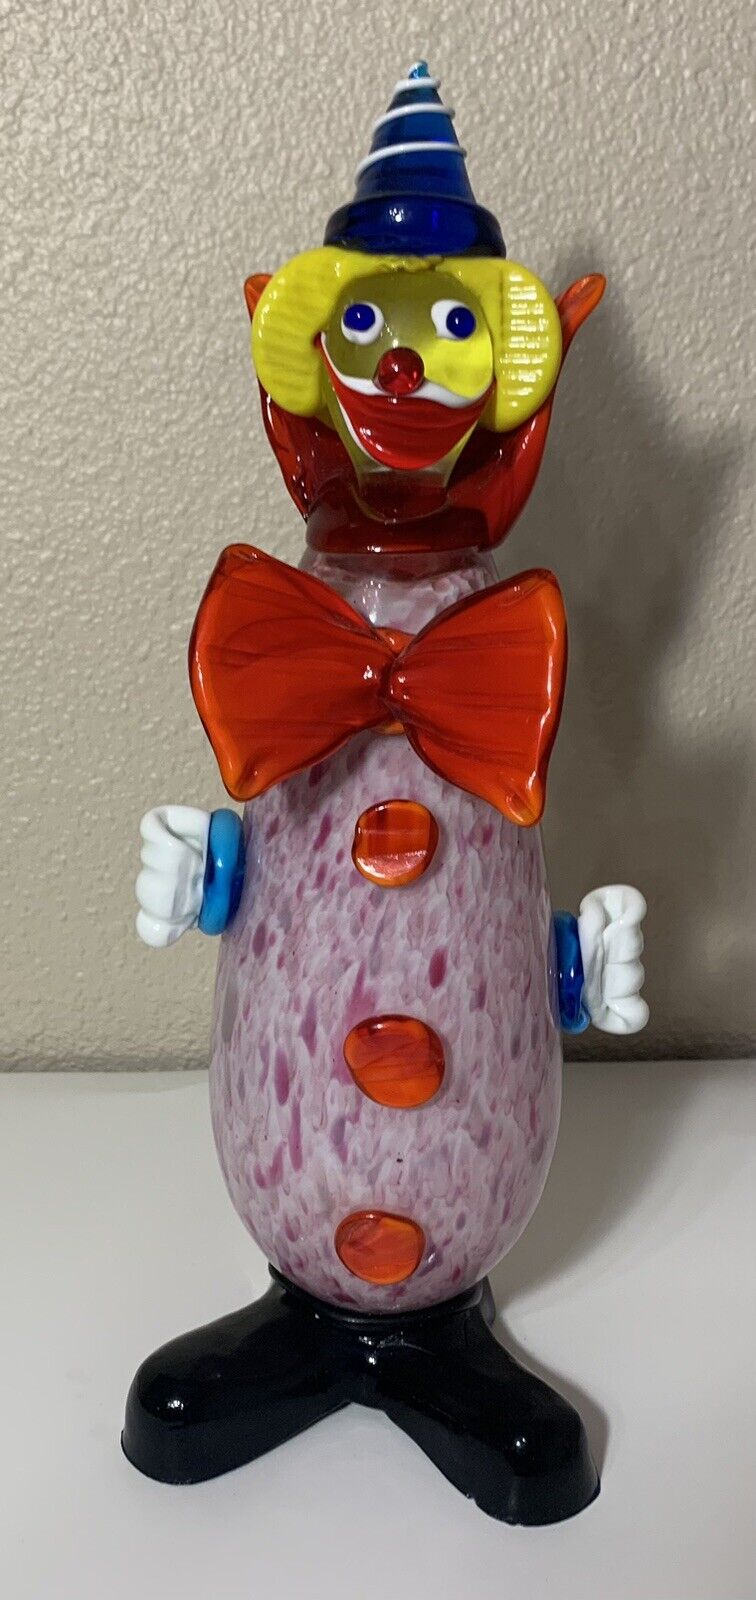 PRISTINE VINTAGE MURANO Hand-Blown Glass Clown from Italy … COLLECTORS PIECE